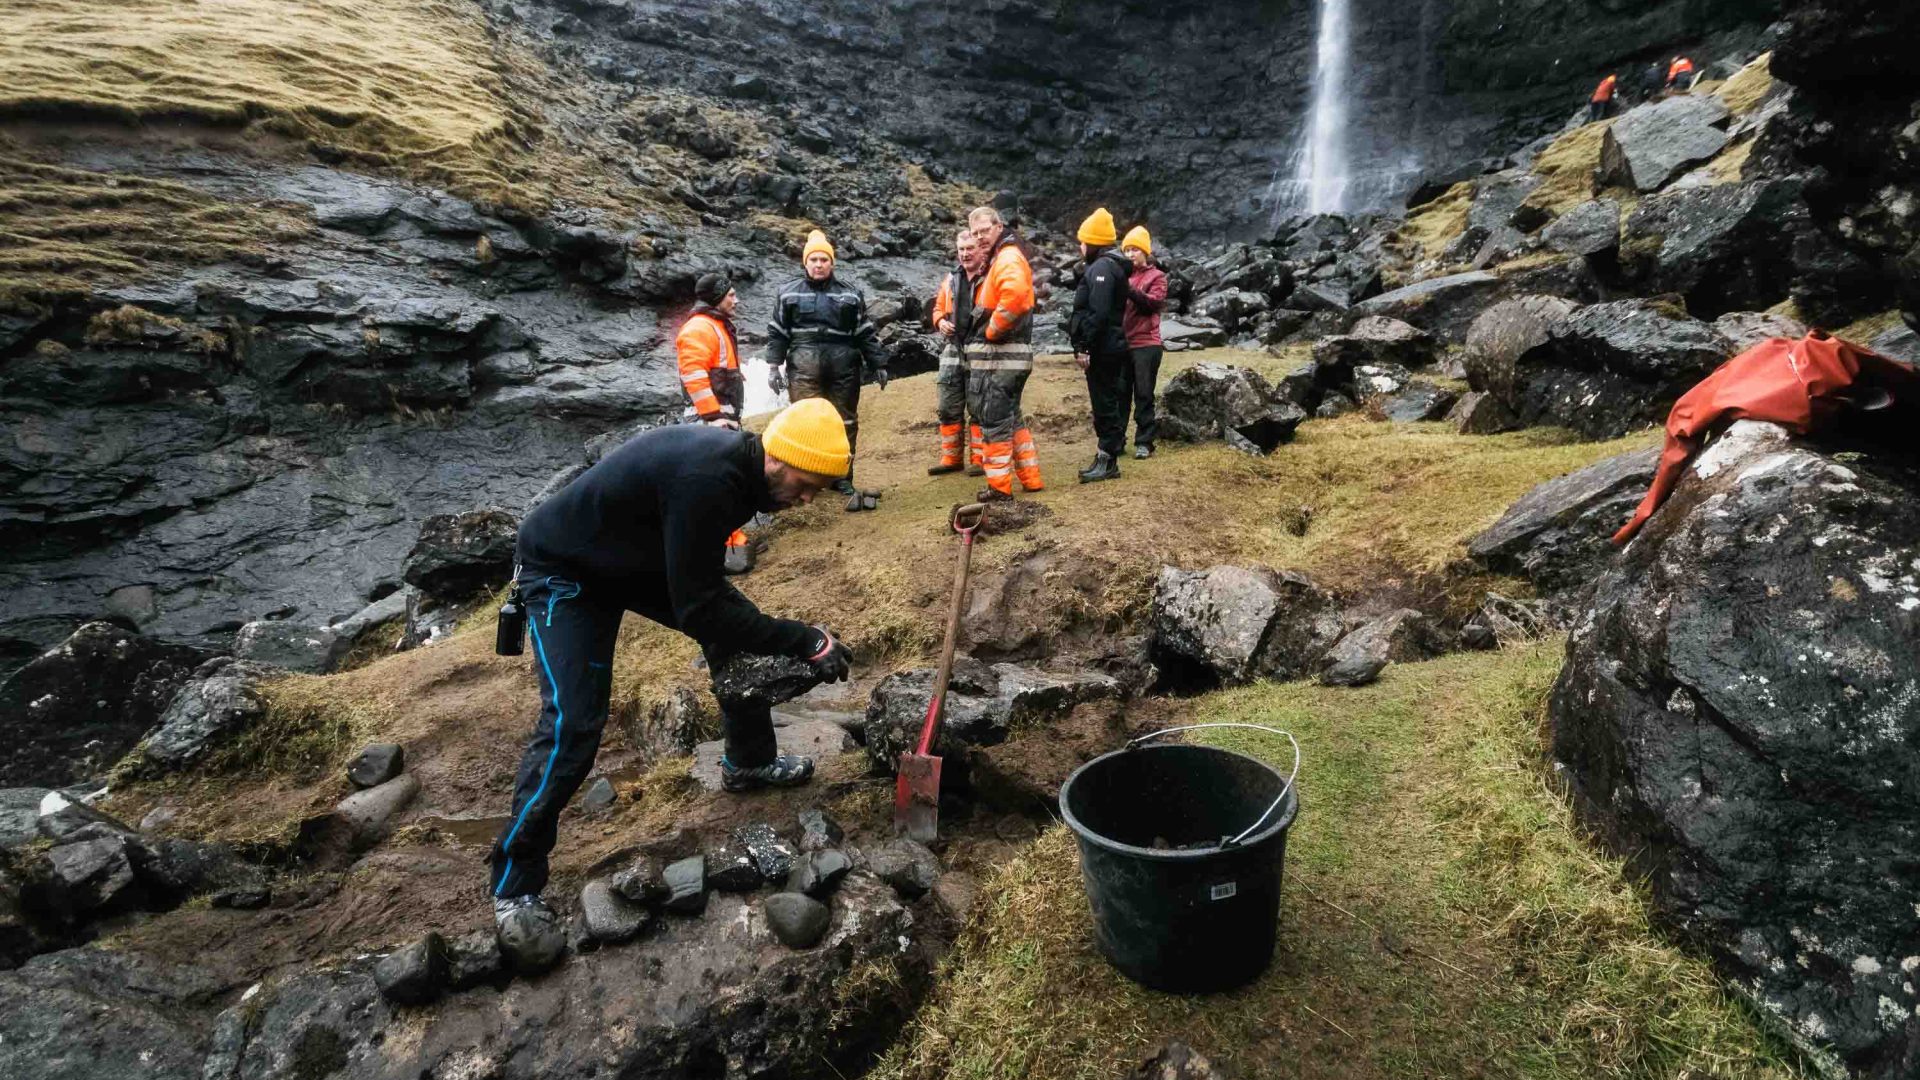 A volunteer digs into the ground near a waterfall while a group of others look on.